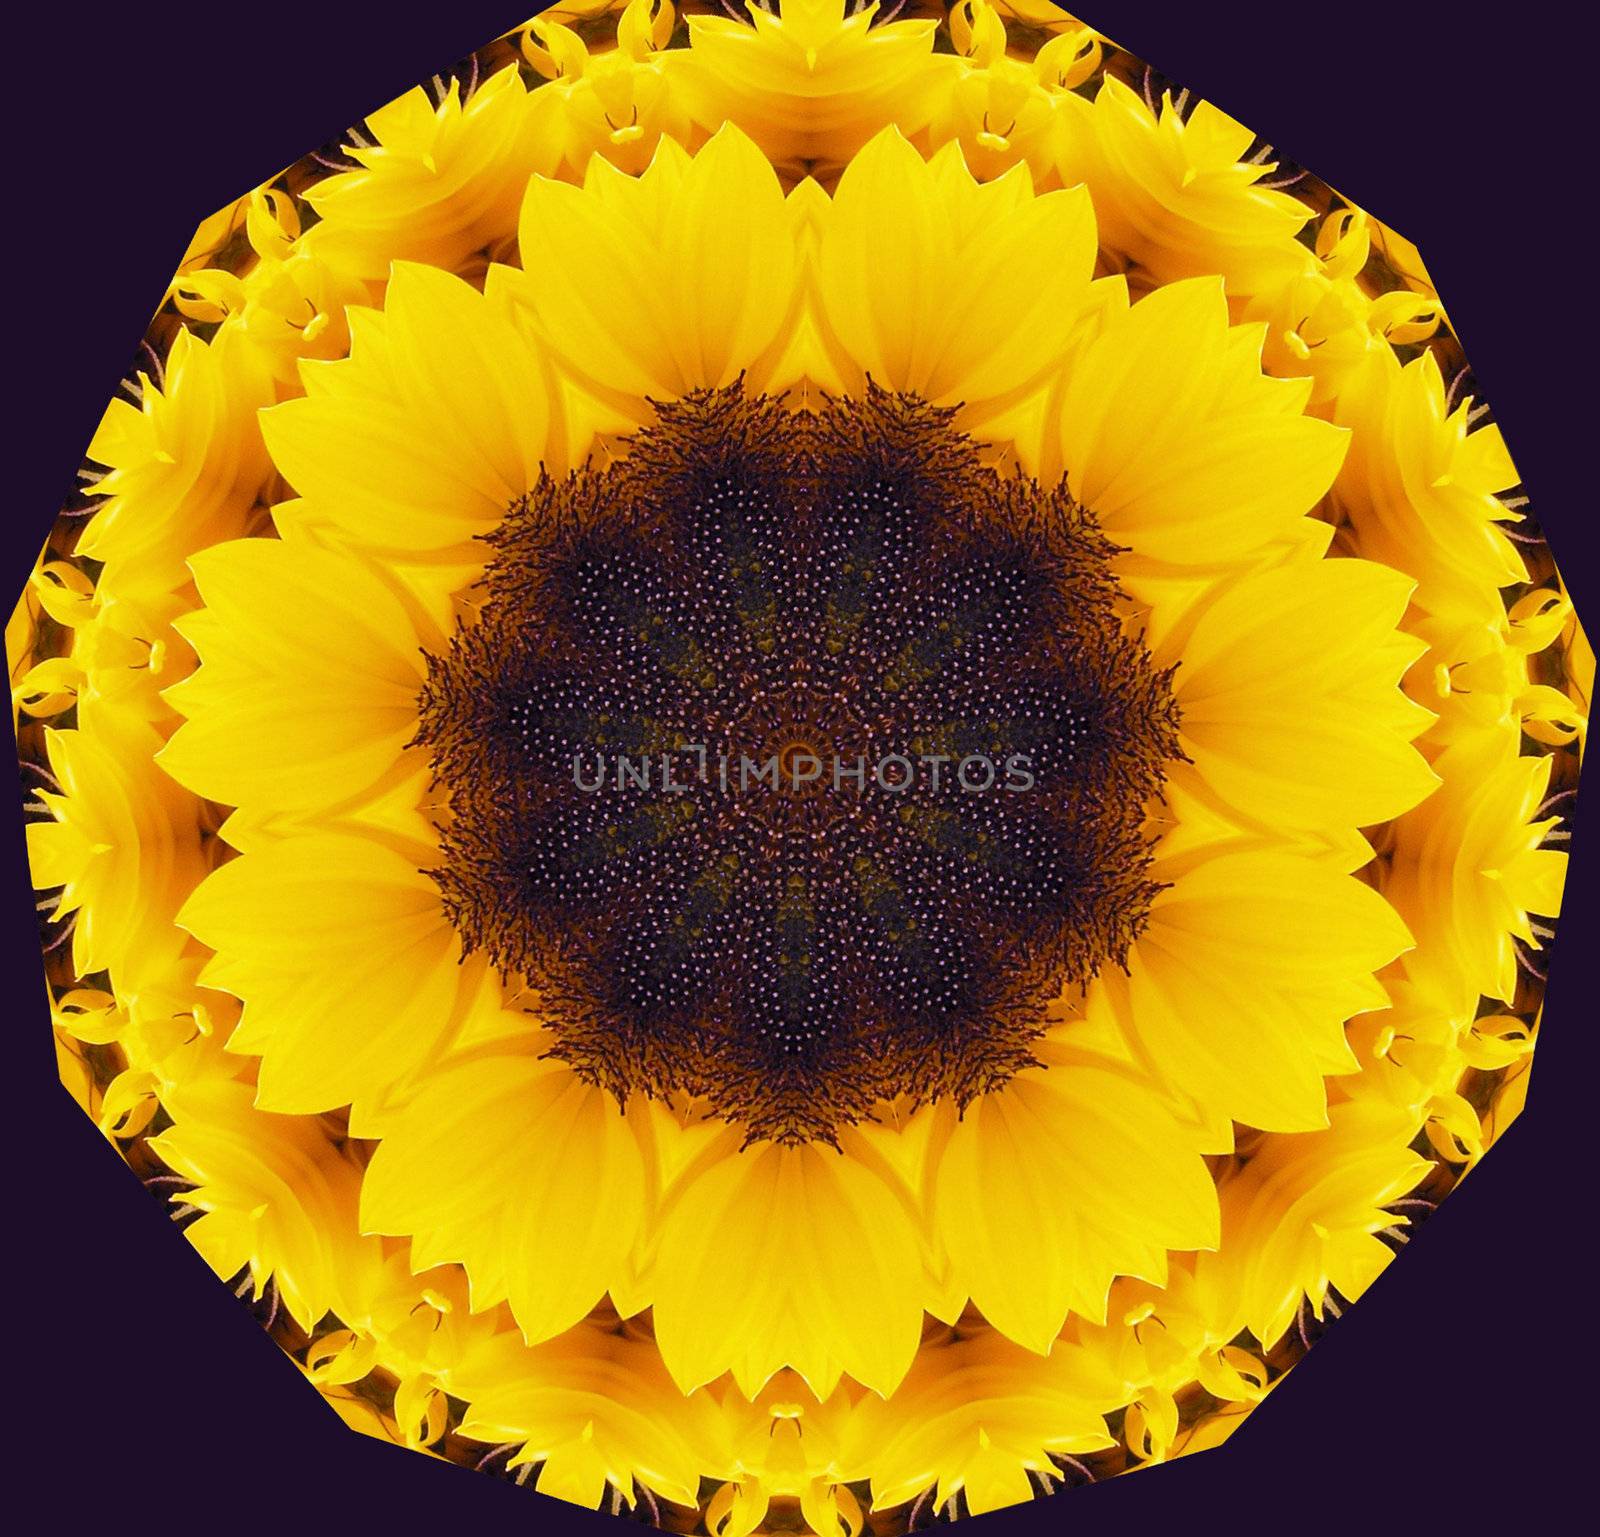 abstract illustration using sunflower elements and colors